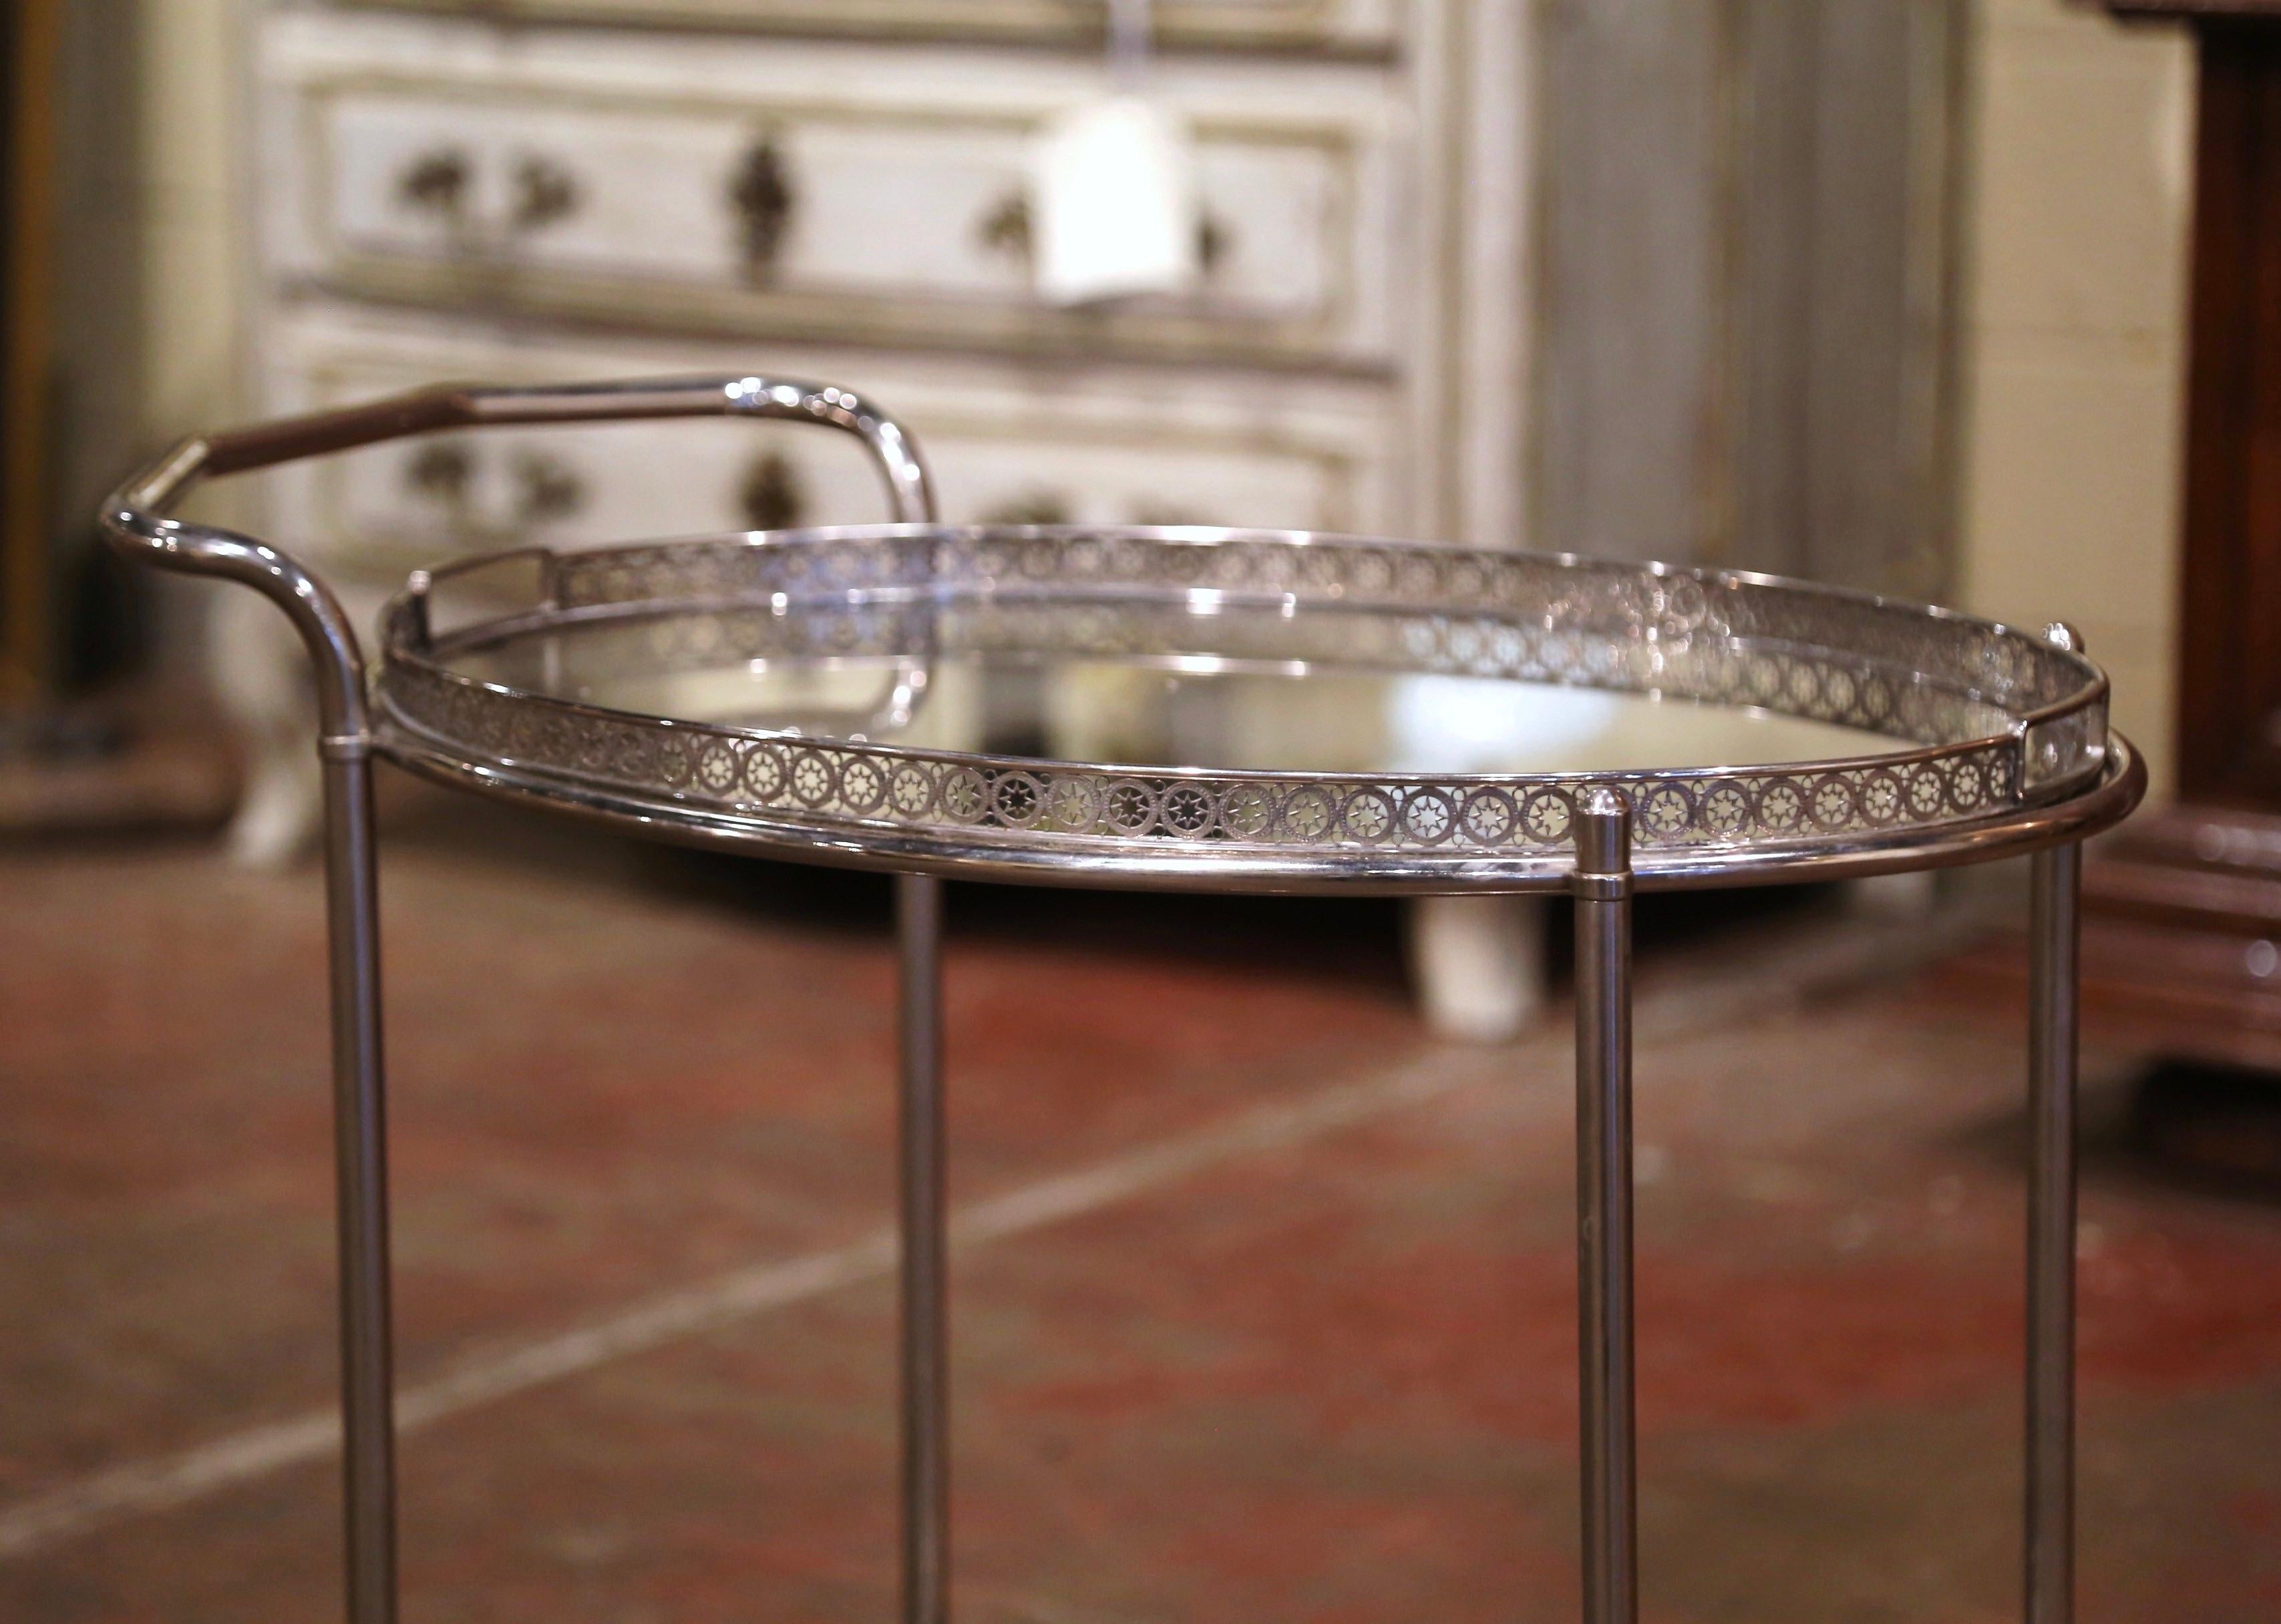 Art Deco Mid-20th Century French Silvered and Glass Desert Two-Tier Service or Bar Cart